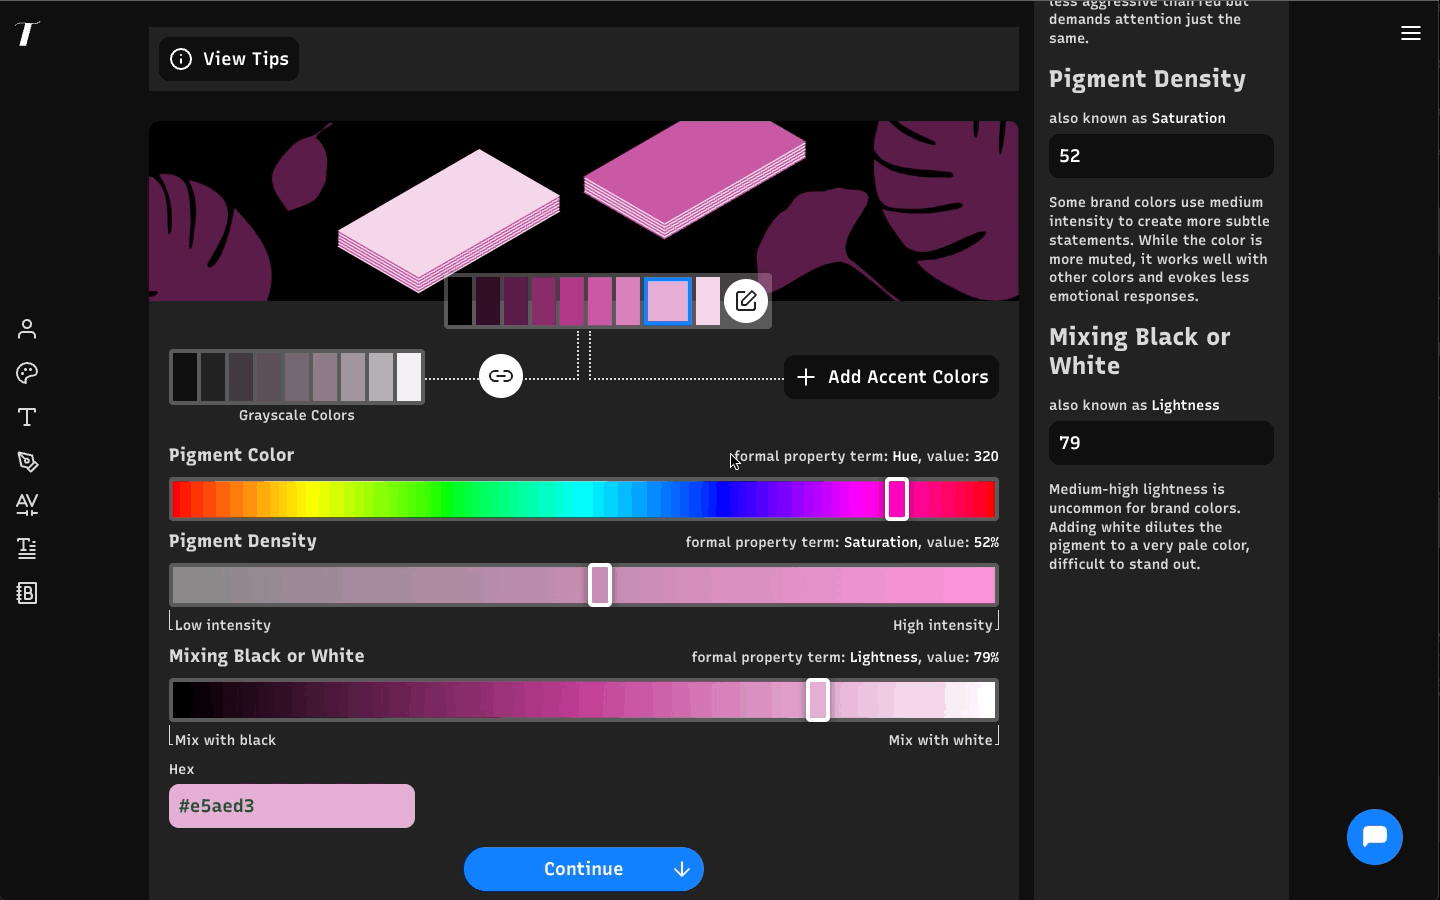 Img: Change color, saturation, and lightness or darkness using our color sliders. You can also click on the edit button to change the number of colors you want to generate.